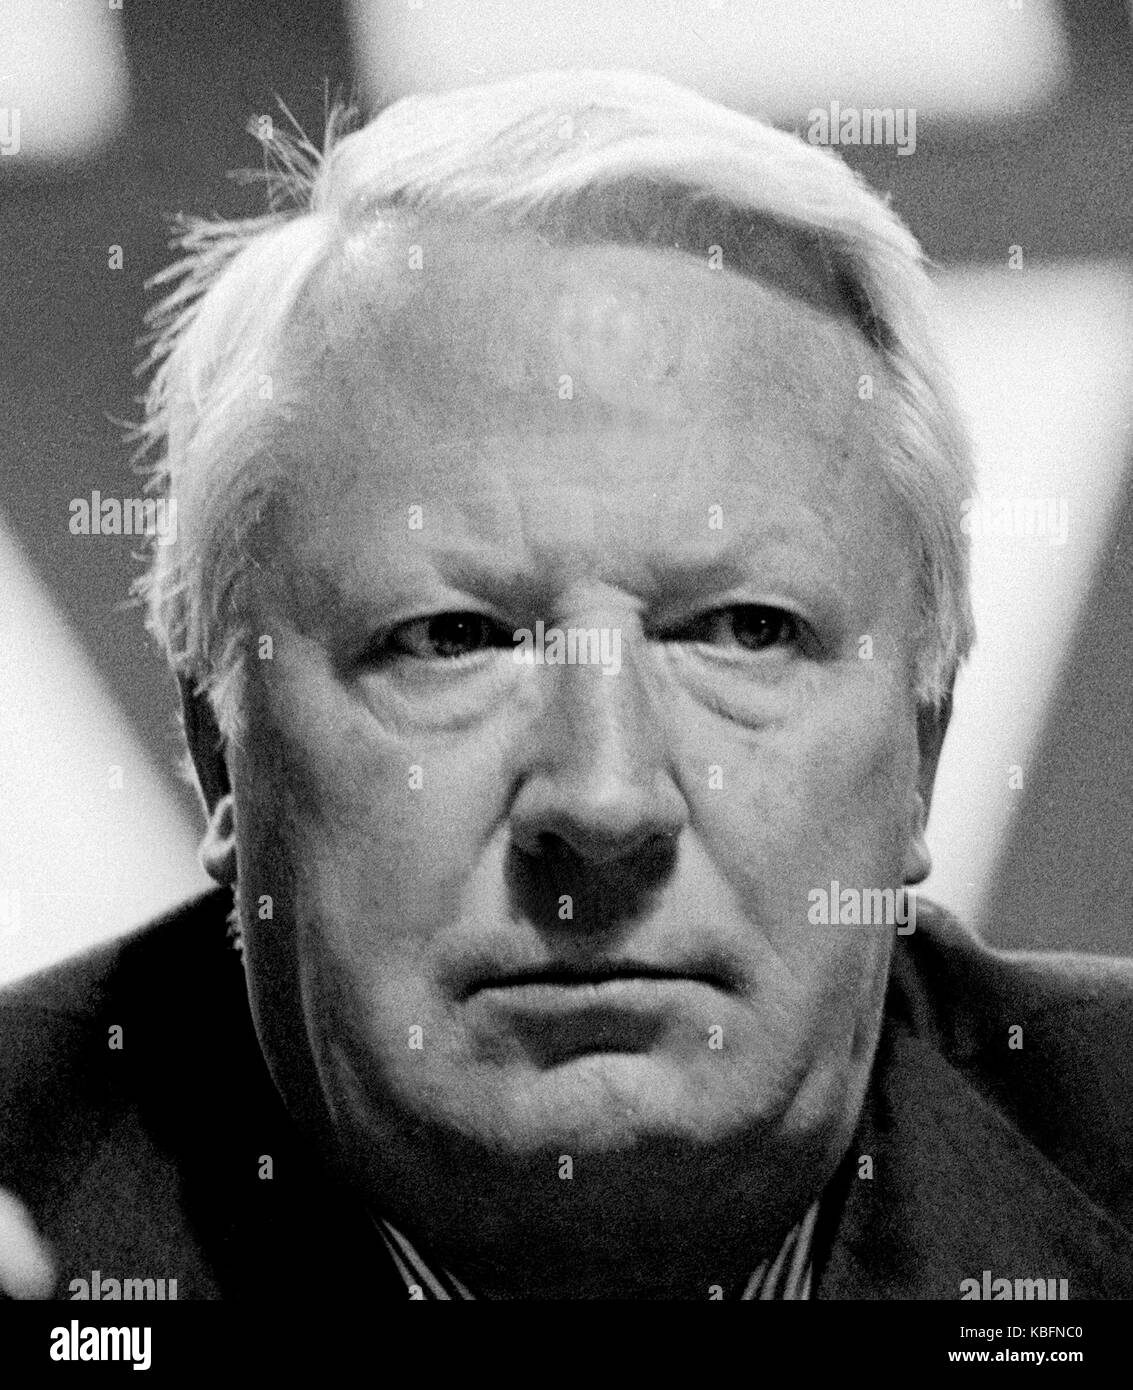 Sir Edward Richard George Heath, KG, MBE, better known as Ted Heath, was a British politician who served as Prime Minister of the United Kingdom from 1970 to 1974 and Leader of the Conservative Party from 1965 to 1975. Exclusive image  dated 1975 by David Cole Press Portrait Service archives Stock Photo